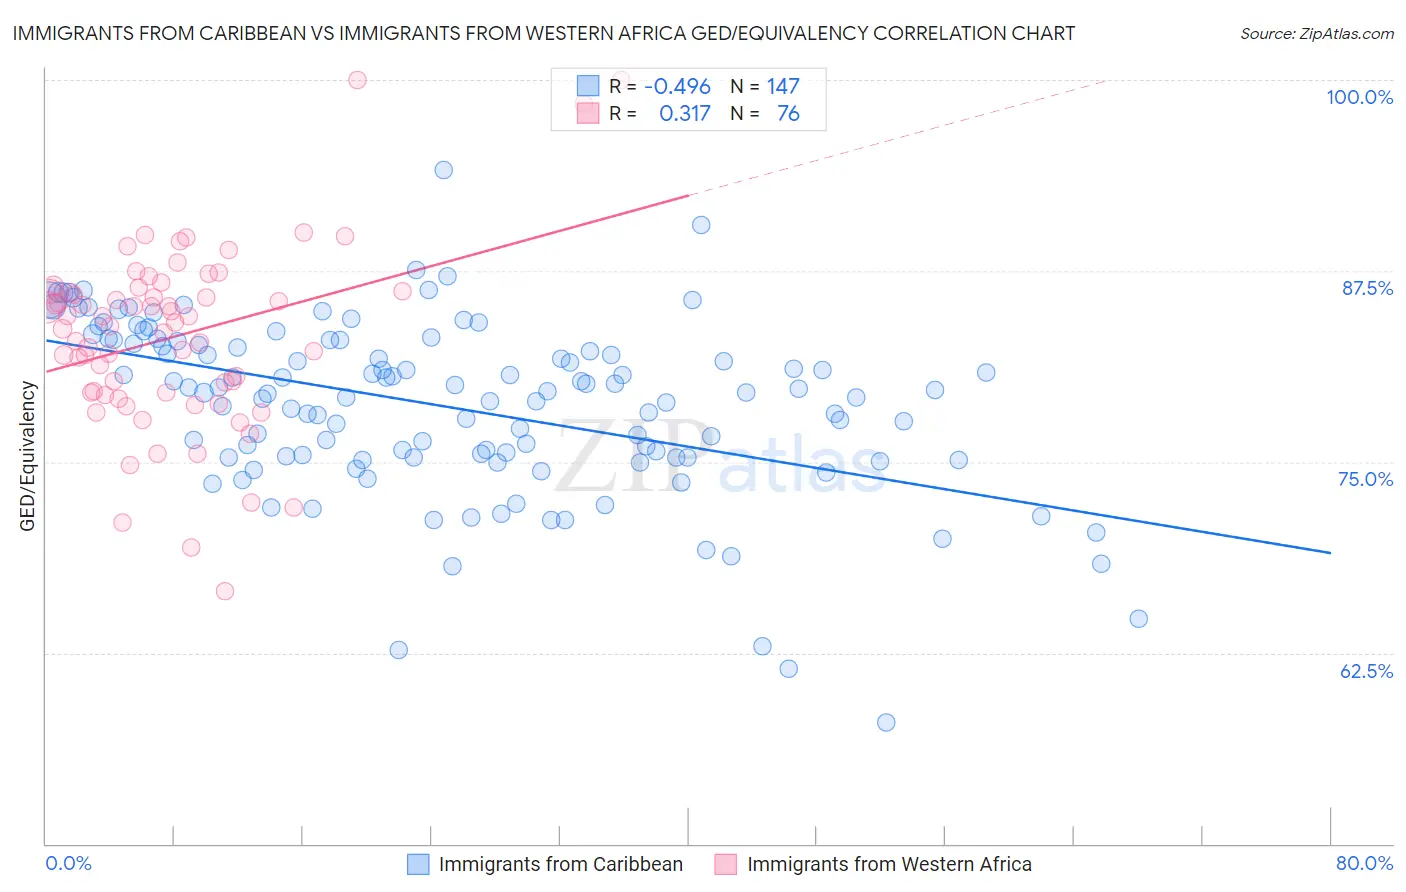 Immigrants from Caribbean vs Immigrants from Western Africa GED/Equivalency